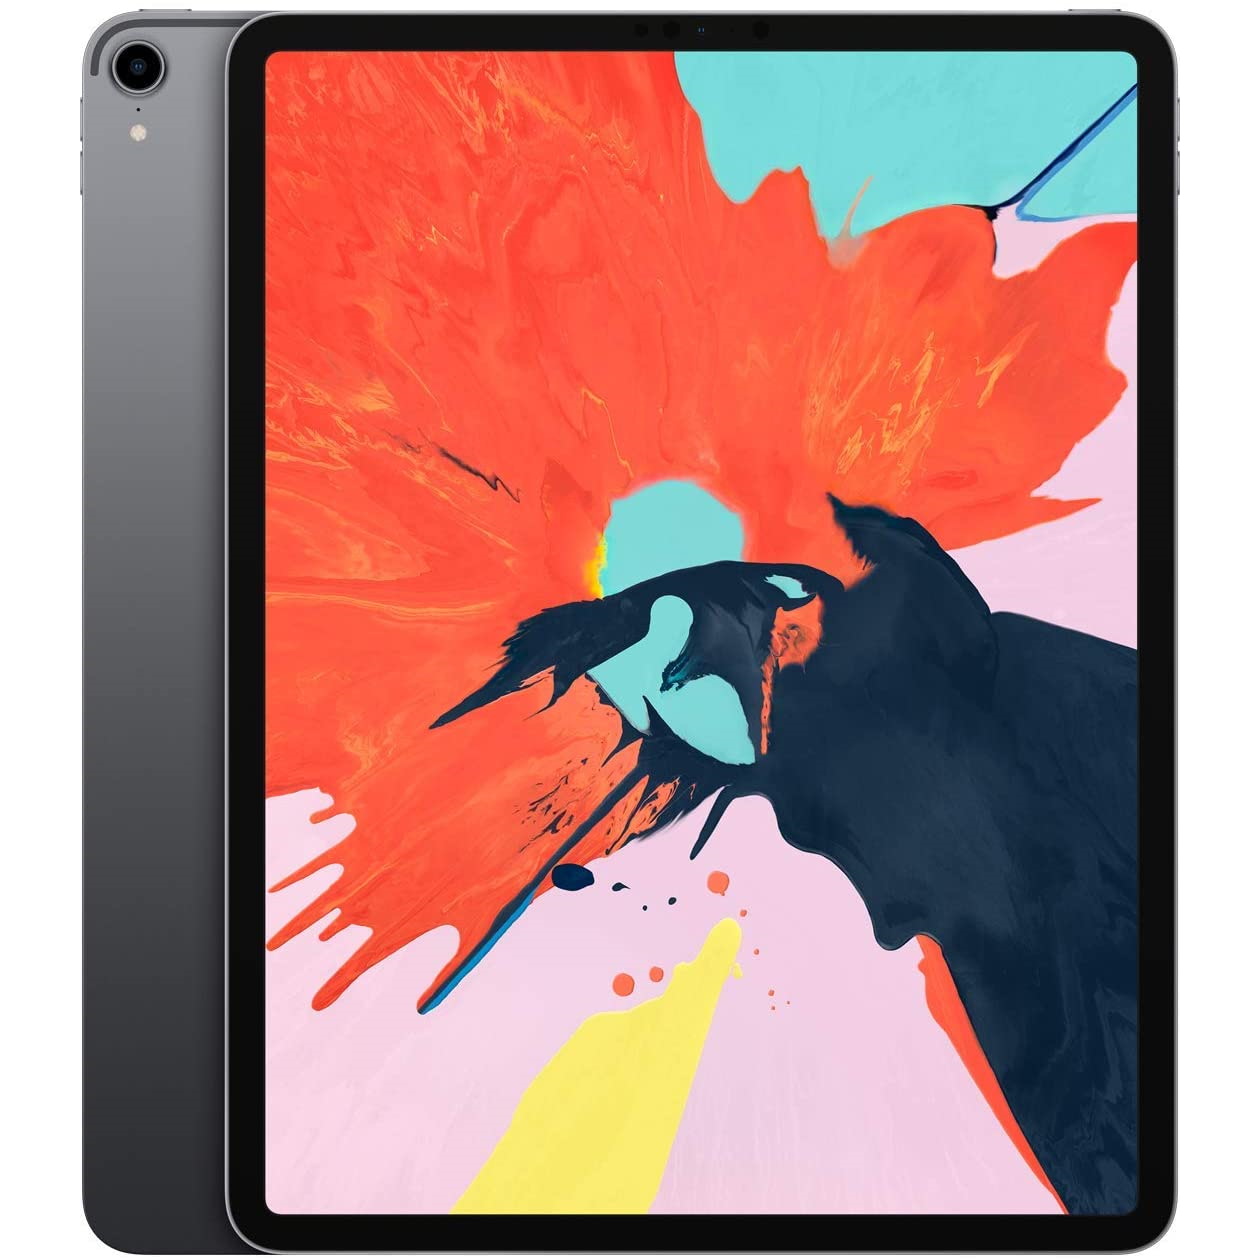 Early Labor Day sales alert: save $500 on the iPad Pro with free extras this weekend